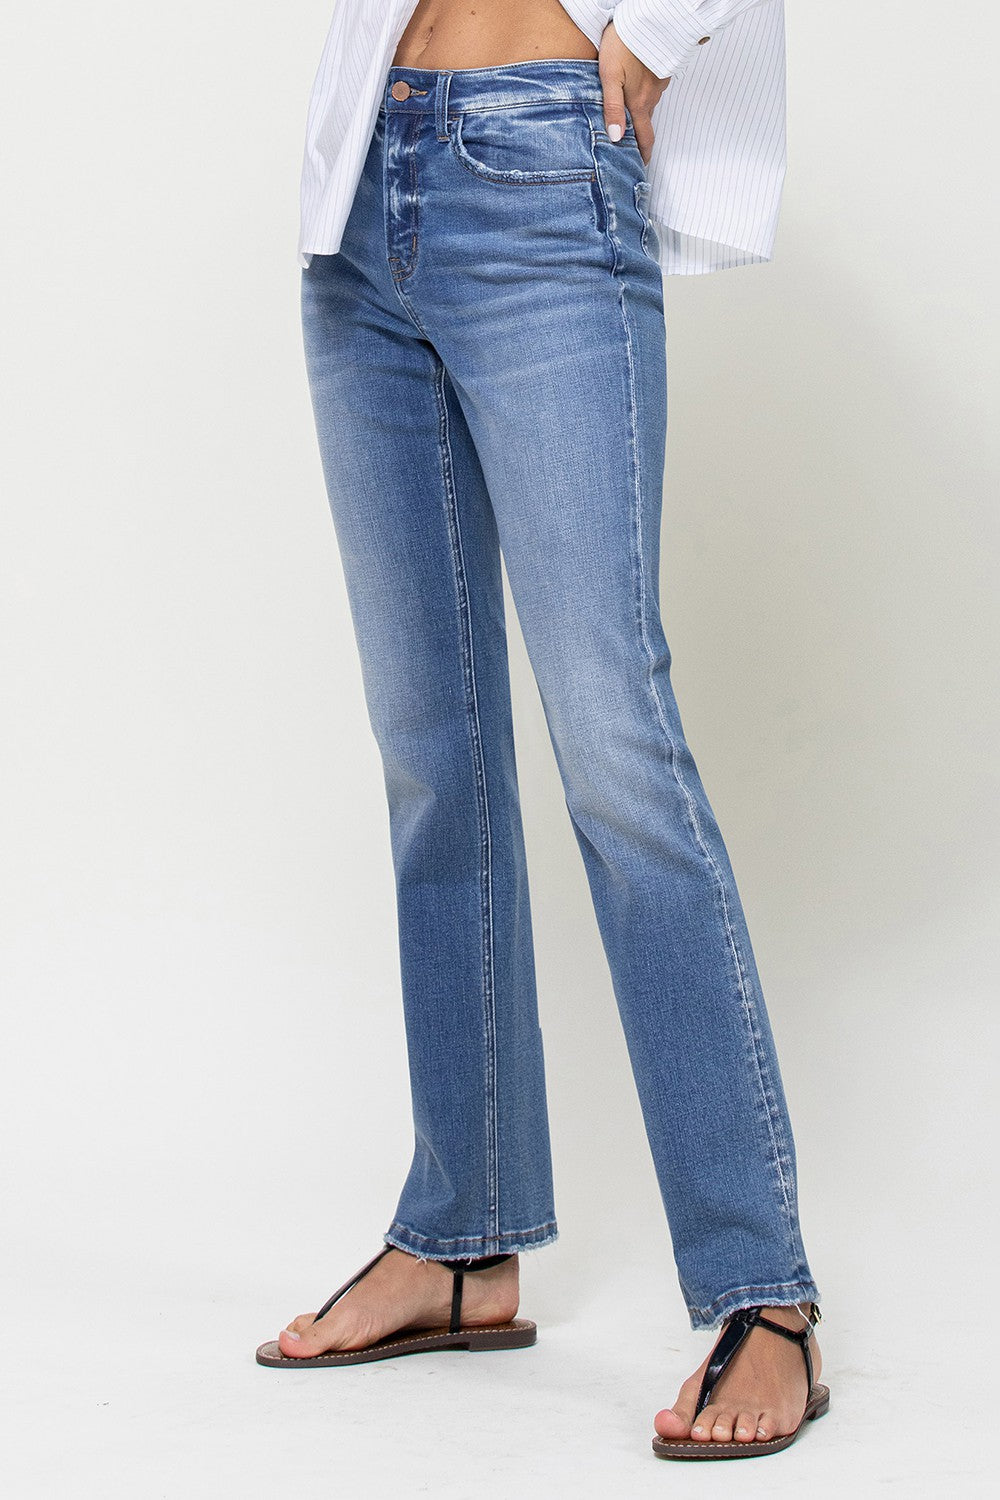 Flying Monkey : Independent Classic Straight Jean